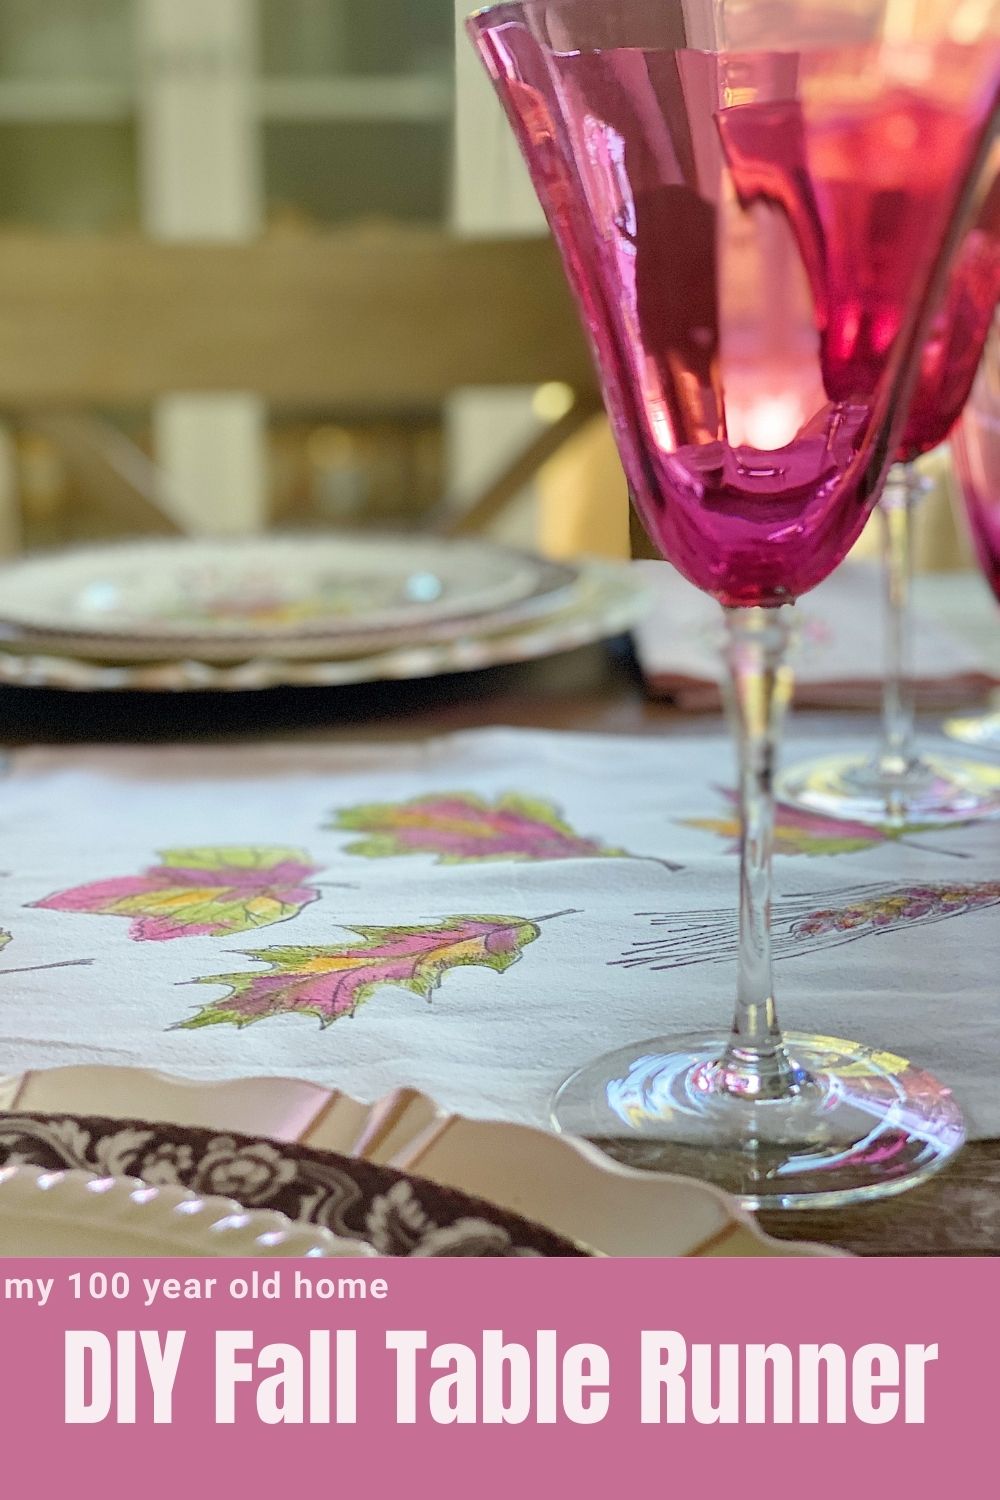 I thought it might be fun to make a Thanksgiving Table Runner. I pulled out my new Iron Orchid Stamps and made this DIY Fall table runner.